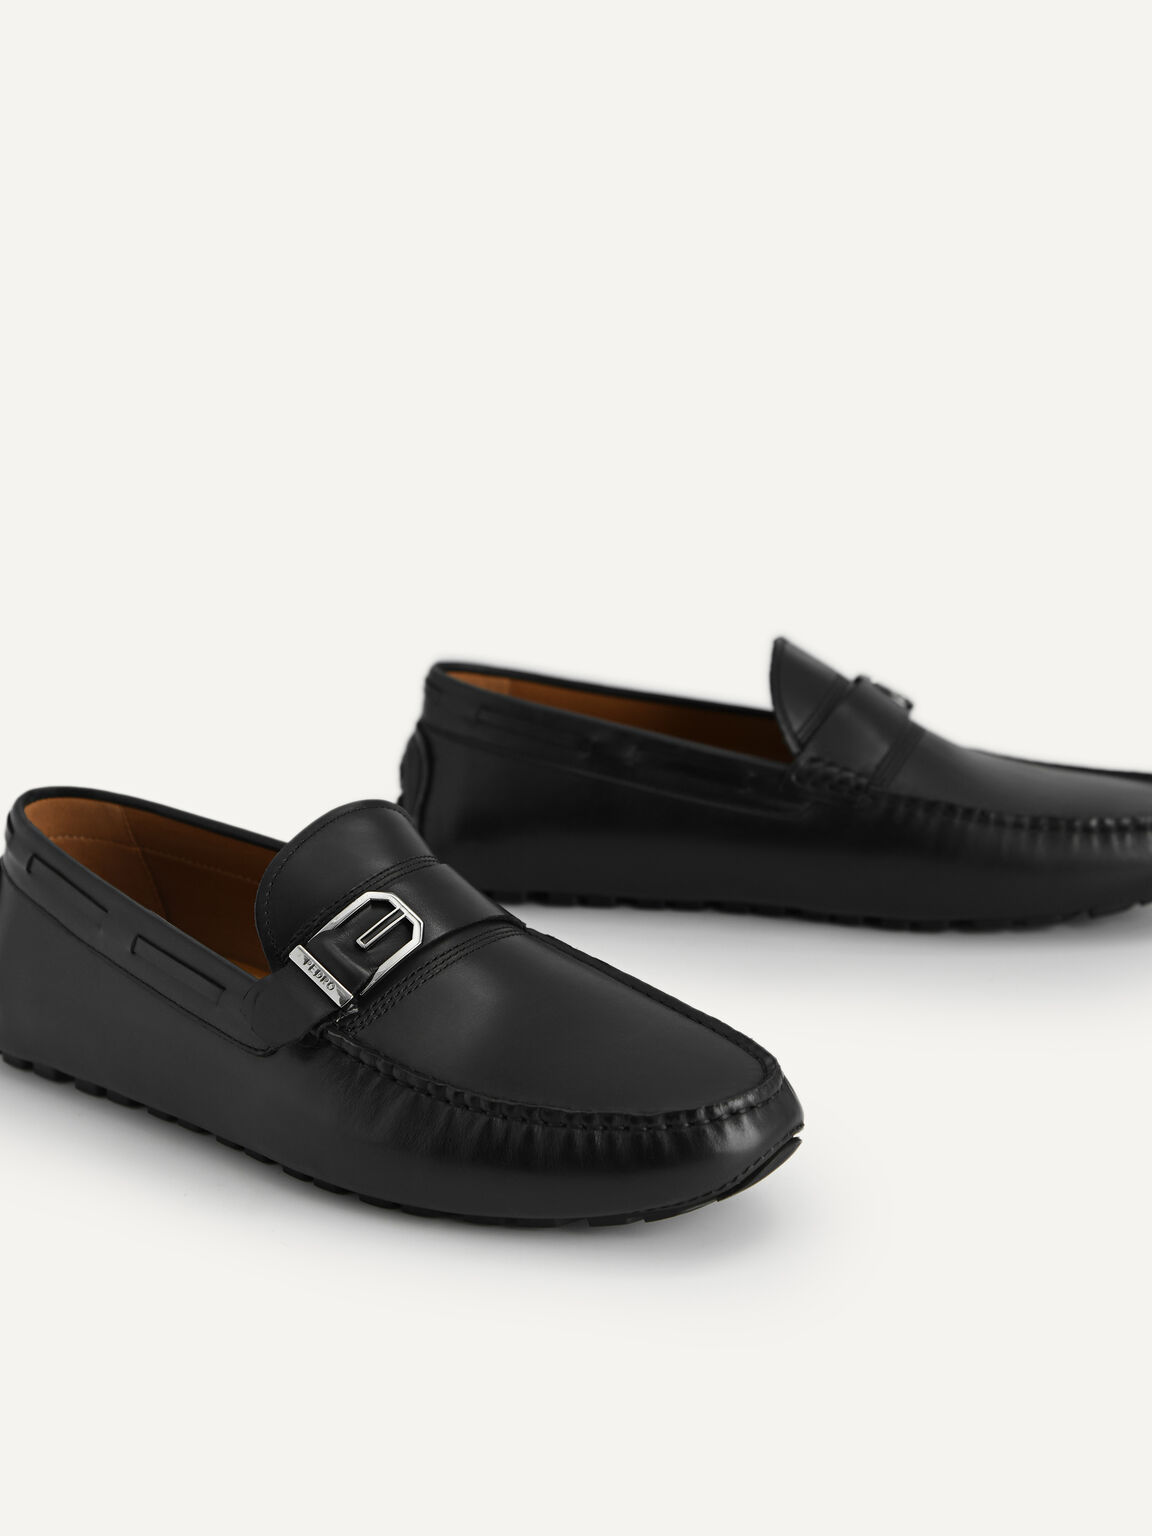 Leather Moccasins with Buckle Detailing, Black, hi-res